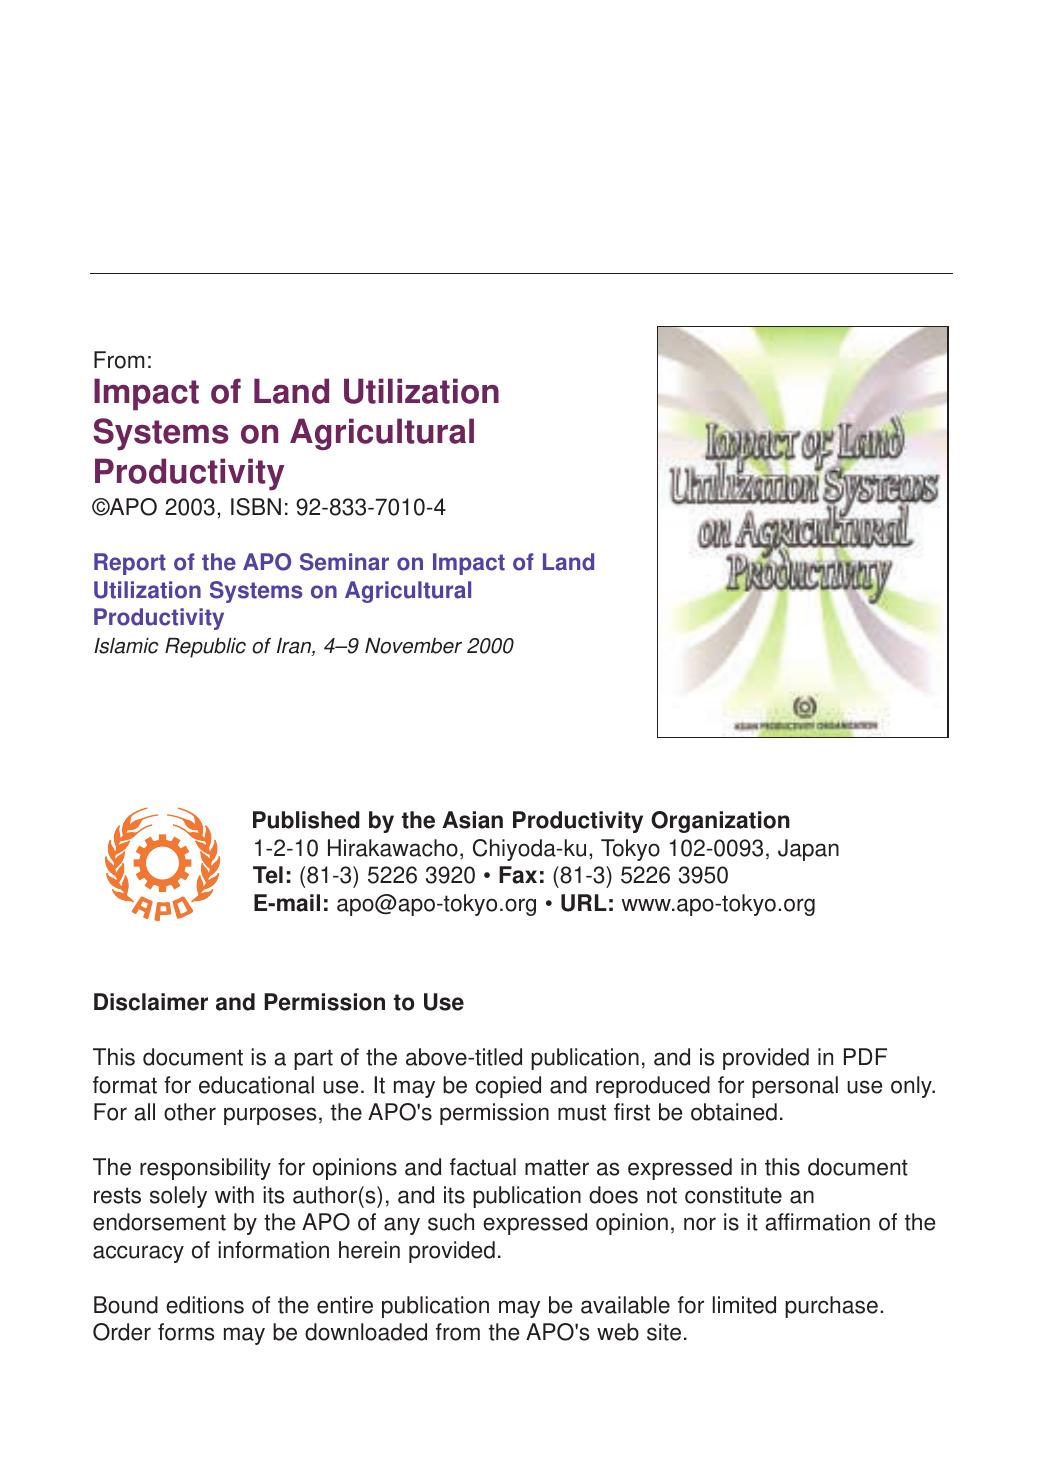 Impact of Land Utilization Systems on Agricultural Productivity 2003